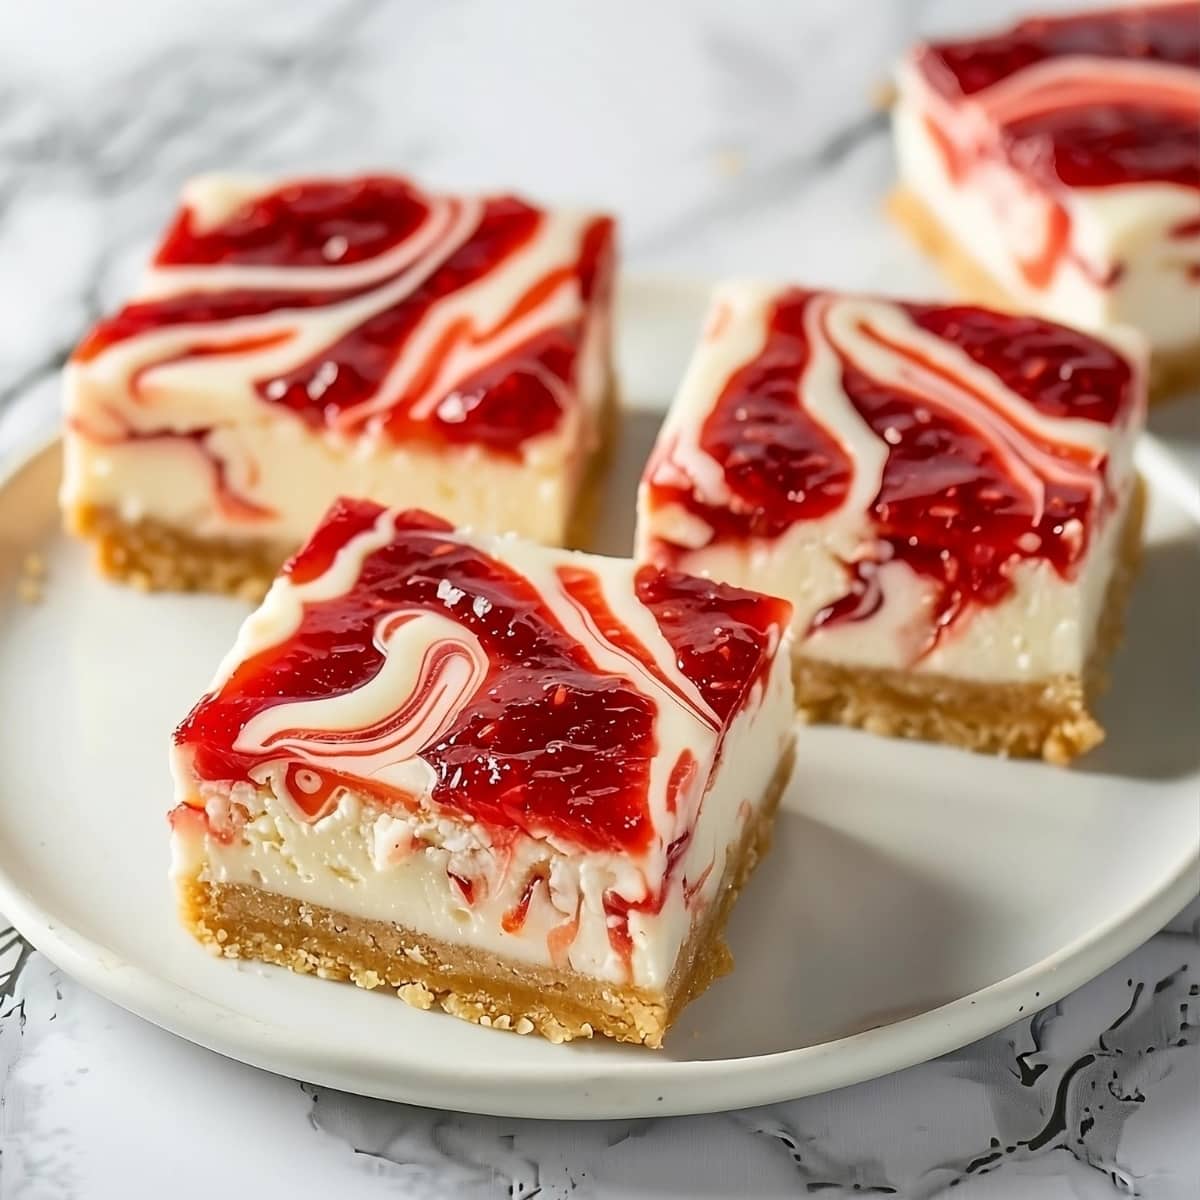 Square slices of strawberry cheesecake on a round plate.